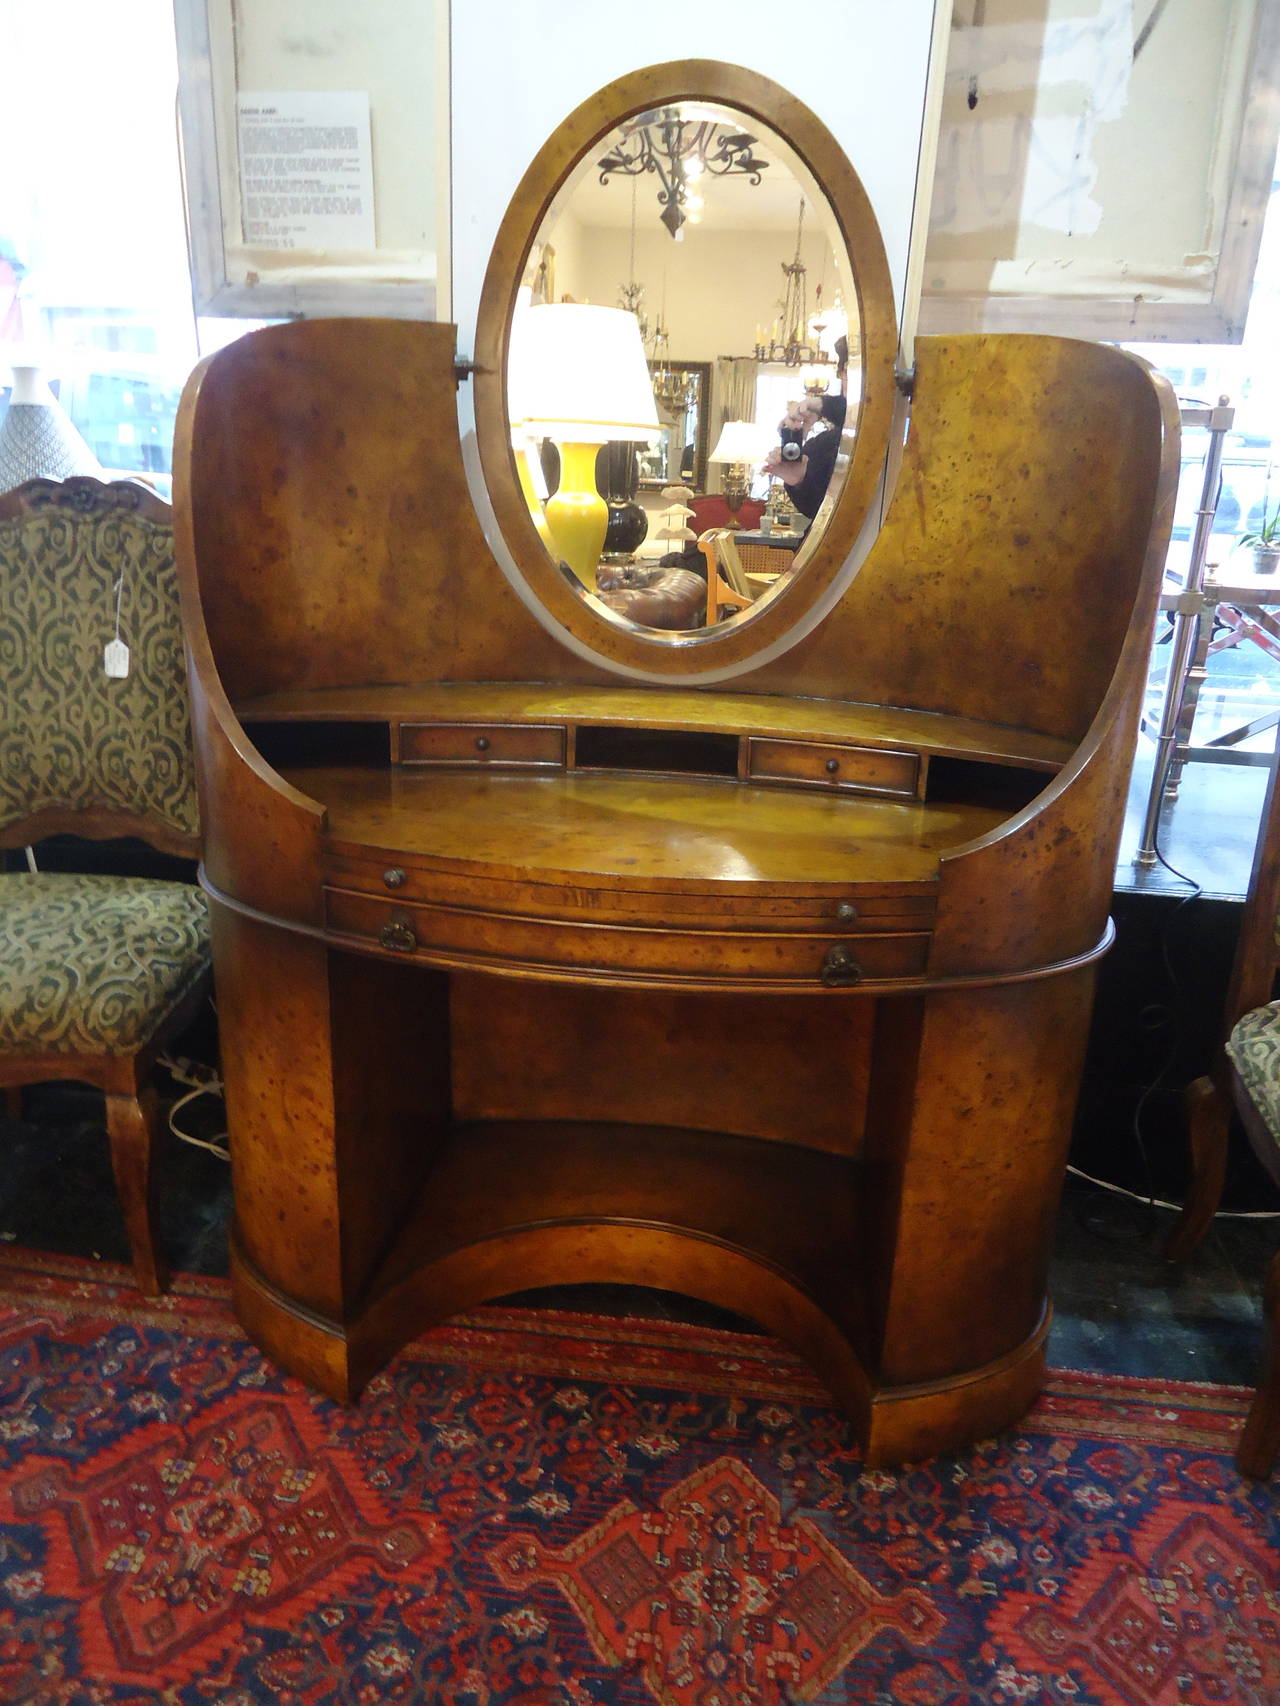 Sensationally curved, elegant burl wood vanity, tooled leather pull-out writing surface, two little drawers (one may be missing), cubbies and oval mirror. Original bronze hardware.